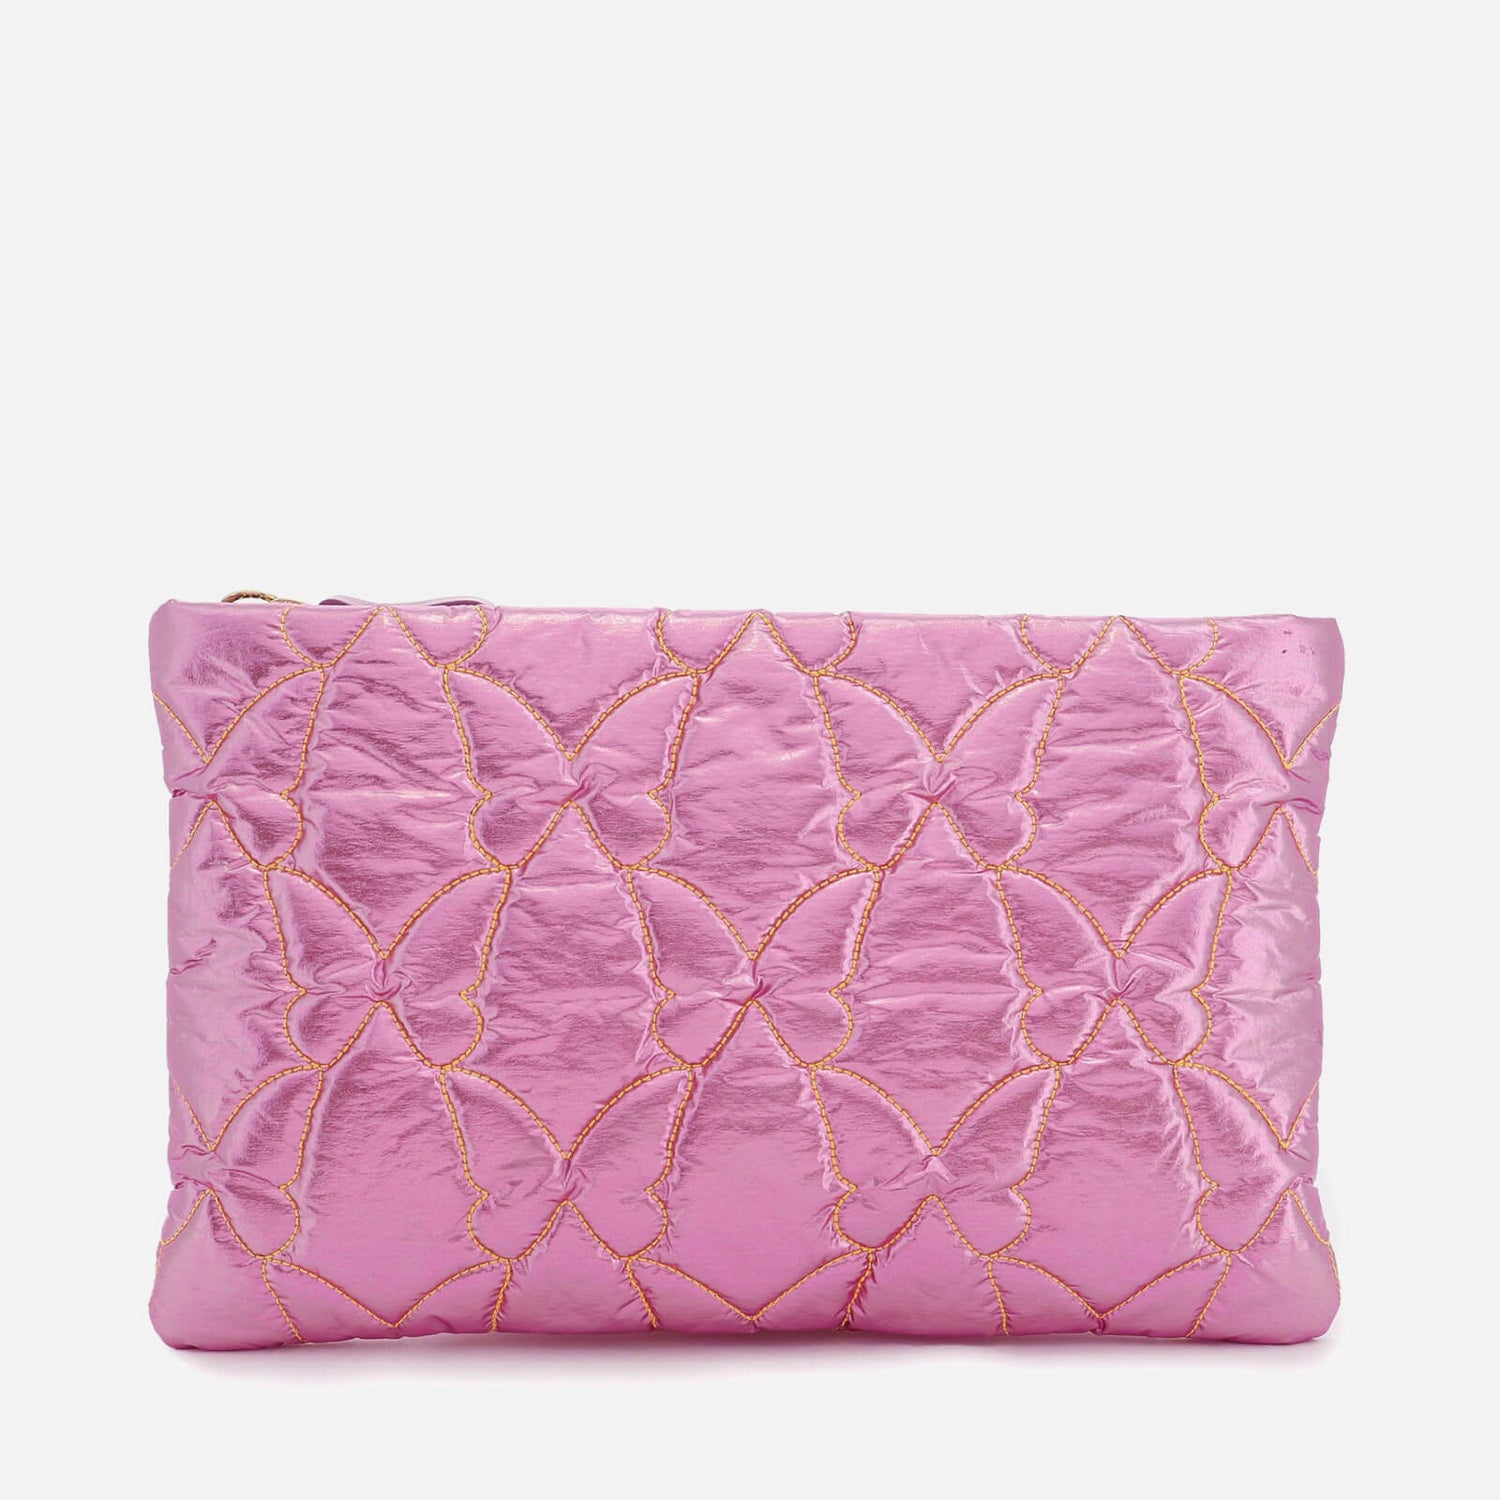 Sophia Webster Gia Butterfly Stitch Textile Clutch Bag